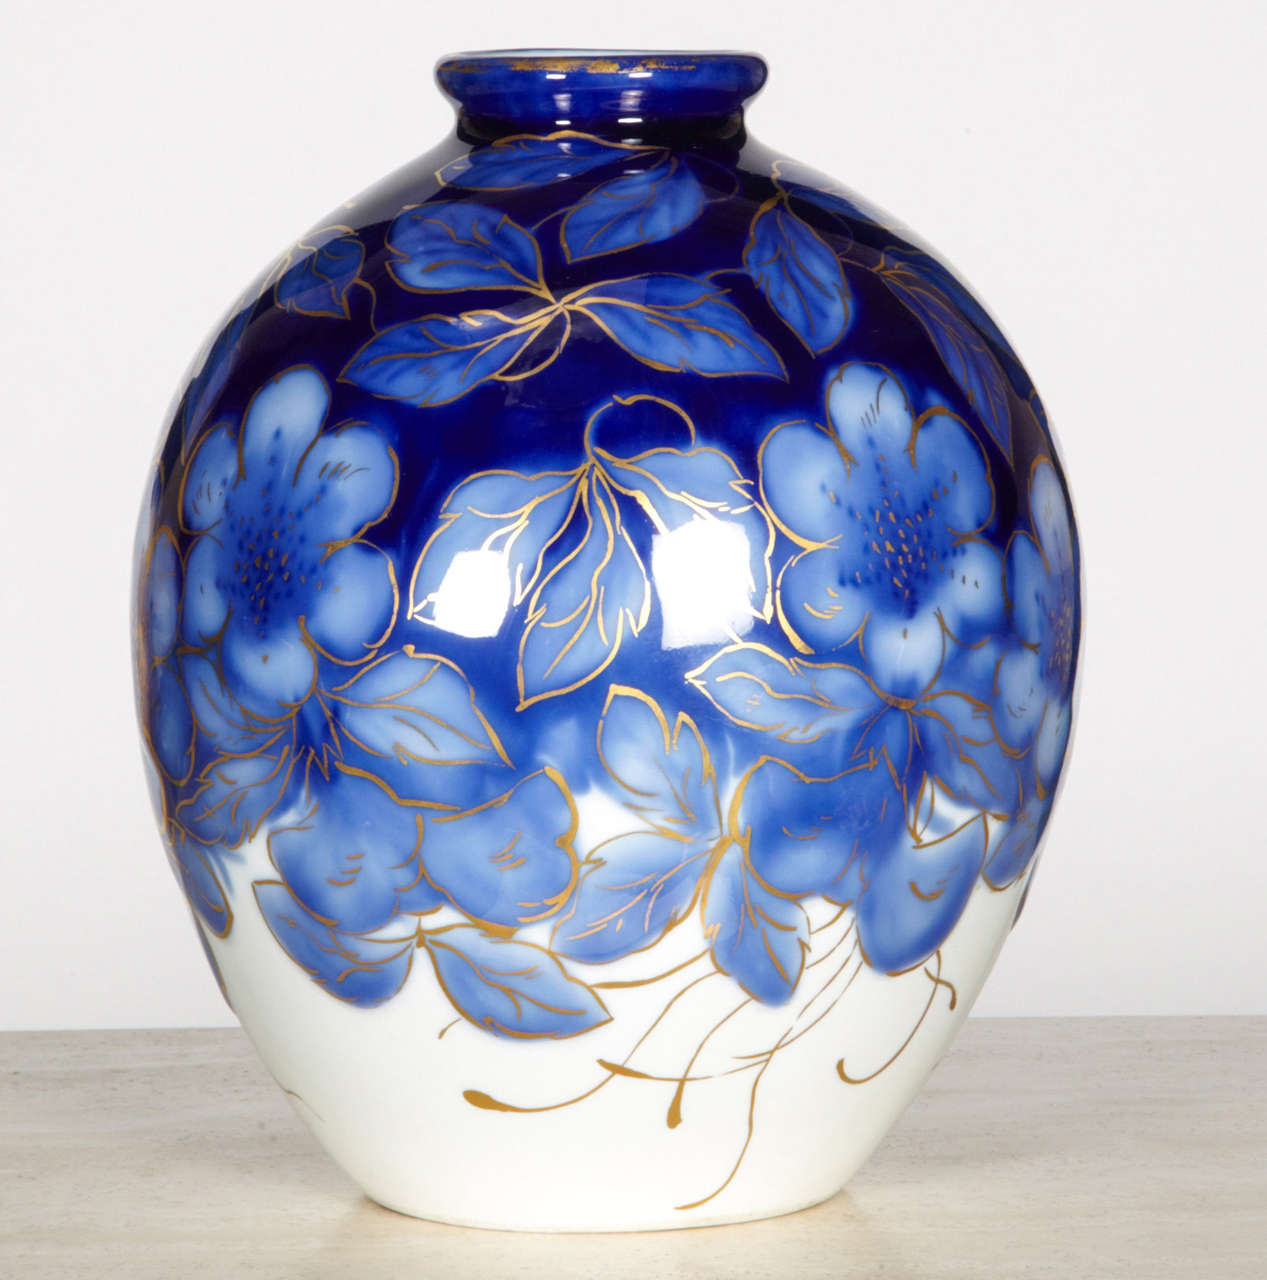 1950s porcelain vase by Camille Tharaud.